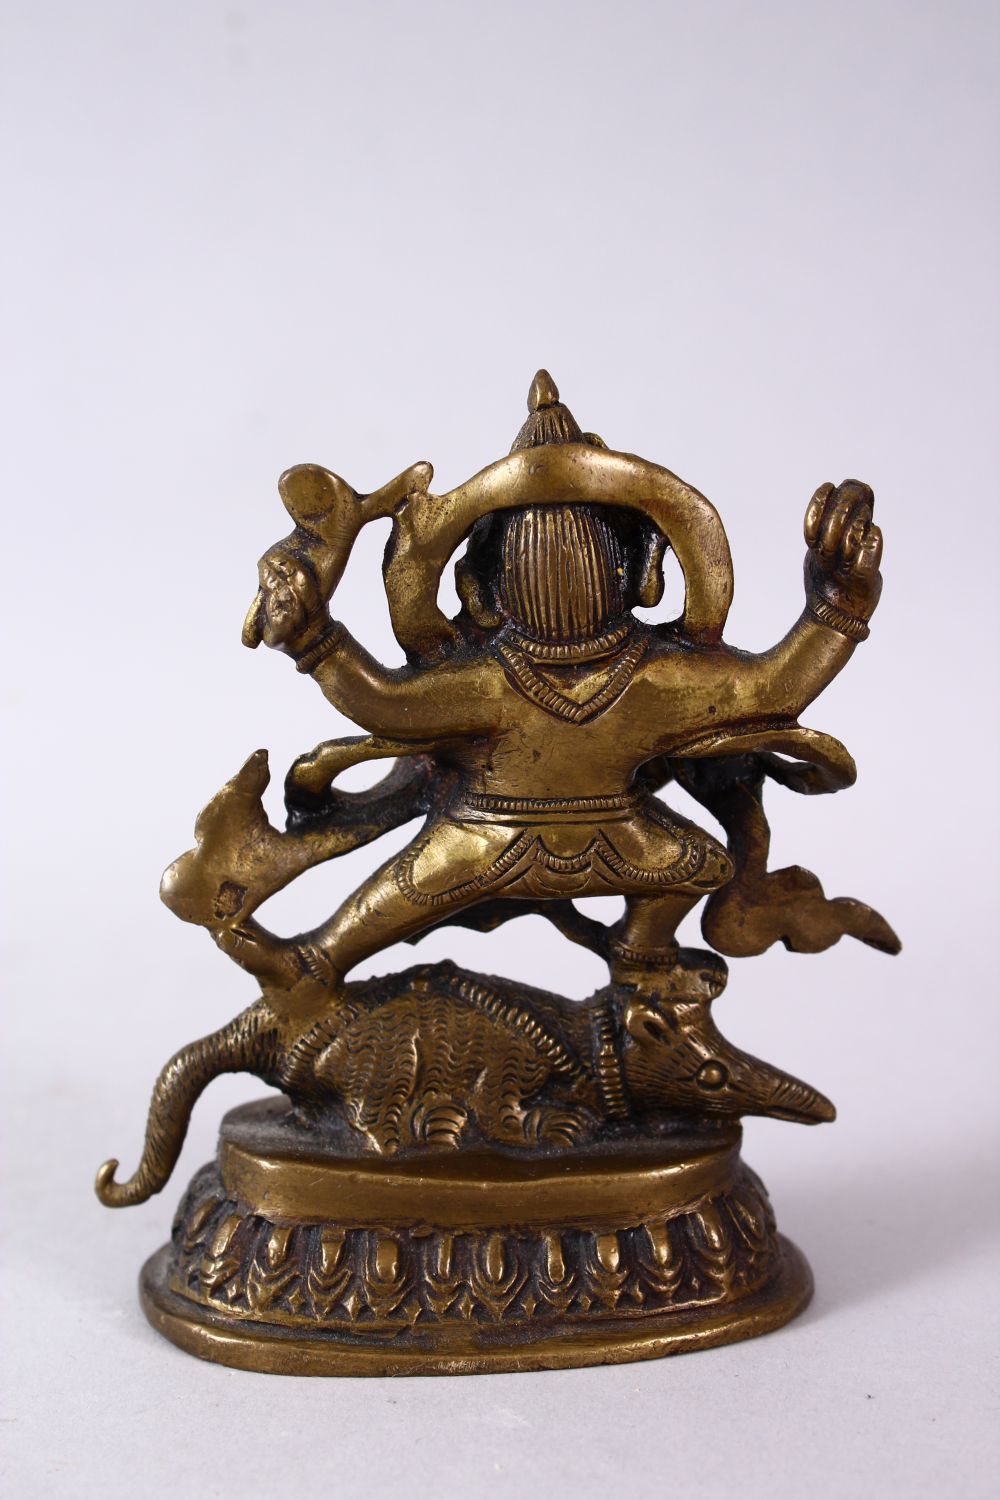 A SMALL INDIAN BRONZE FIGURE OF GANESH UPON BEAST, upon a stylized base, holding many implements. - Image 4 of 6